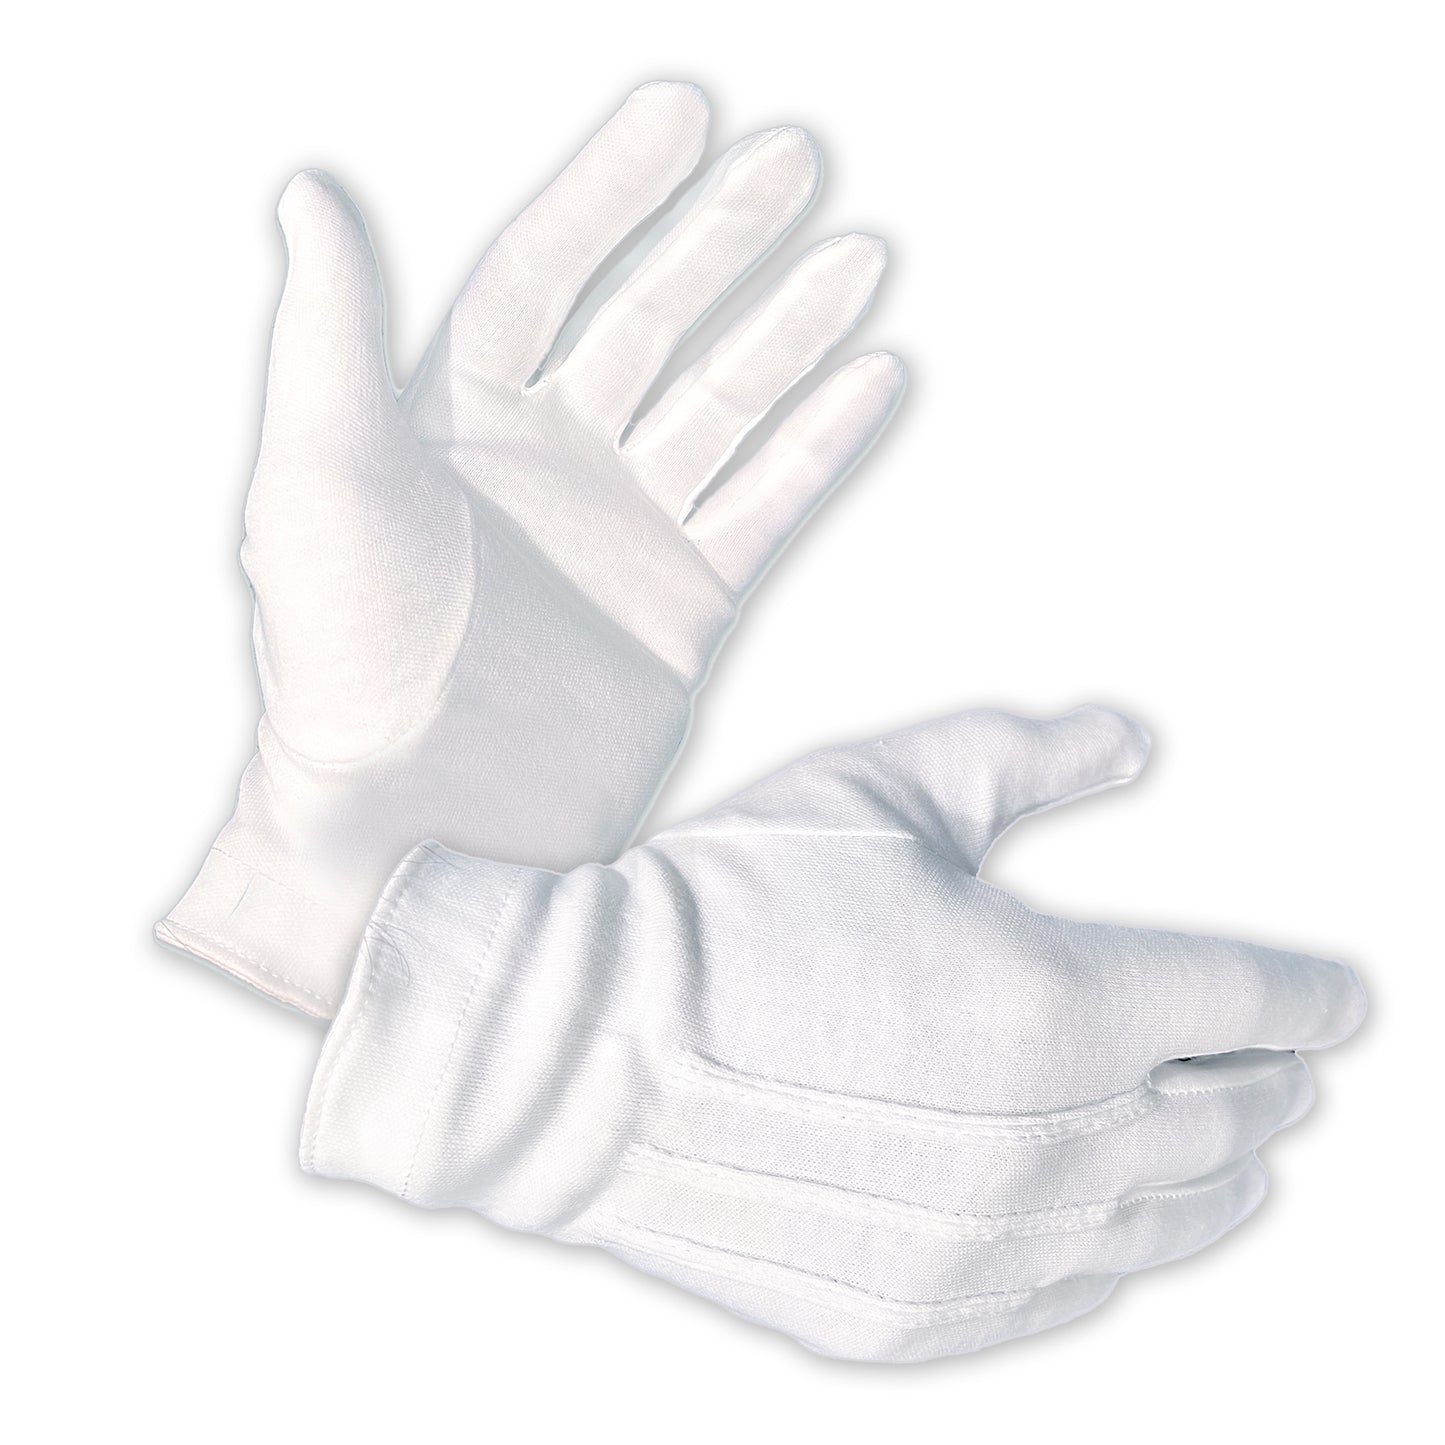 1 Pairs (2 Gloves) Size Extra Large - Gloves Legend 100% White Cotton Marching Parade Formal Dress Gloves - Buy With Prime